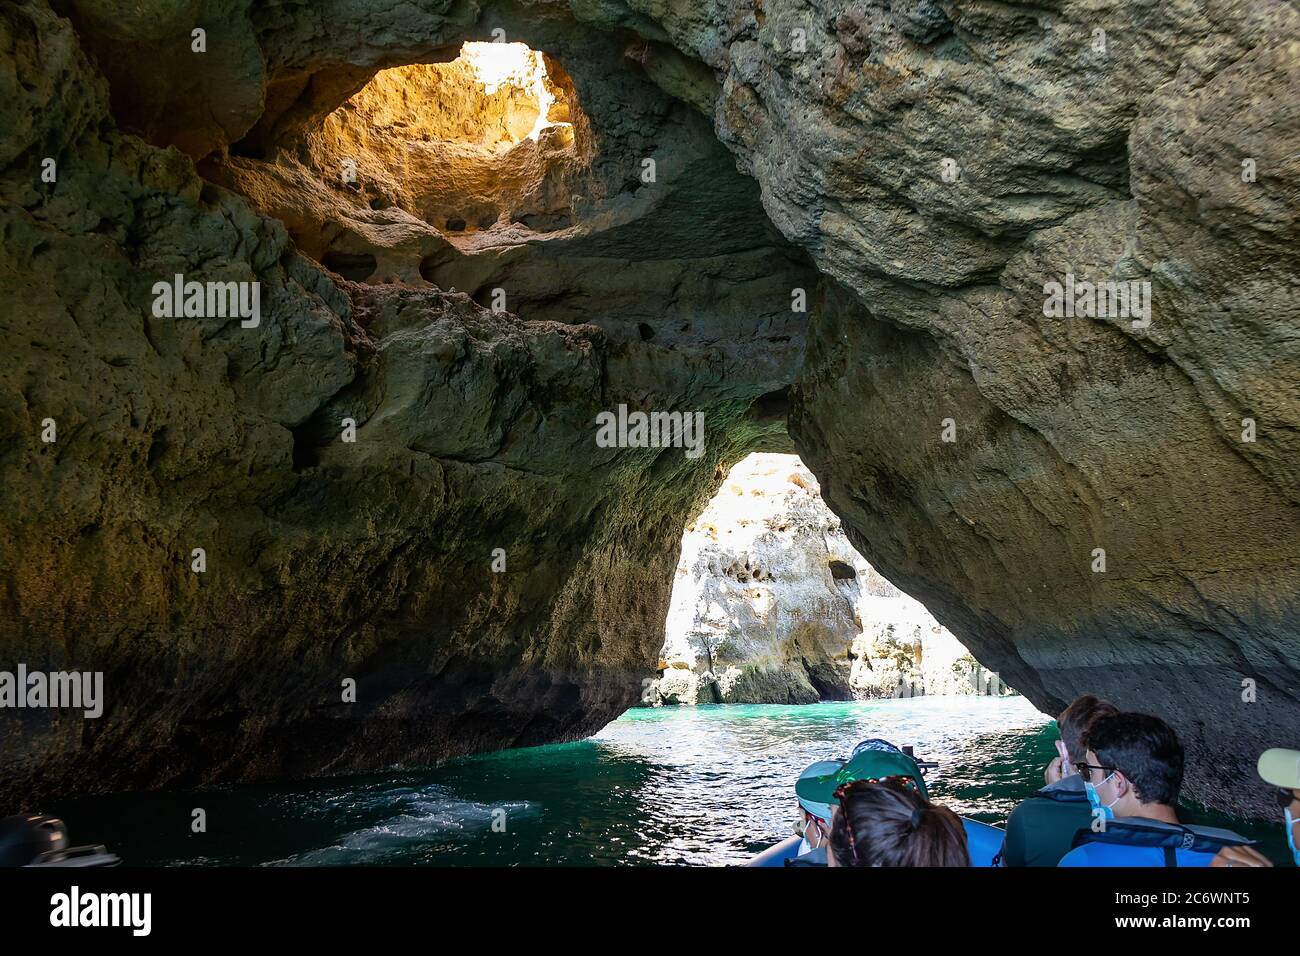 Albufeira, Portugal - July 11, 2020: A group of tourist in a boat visiting the caves of Benagil Stock Photo